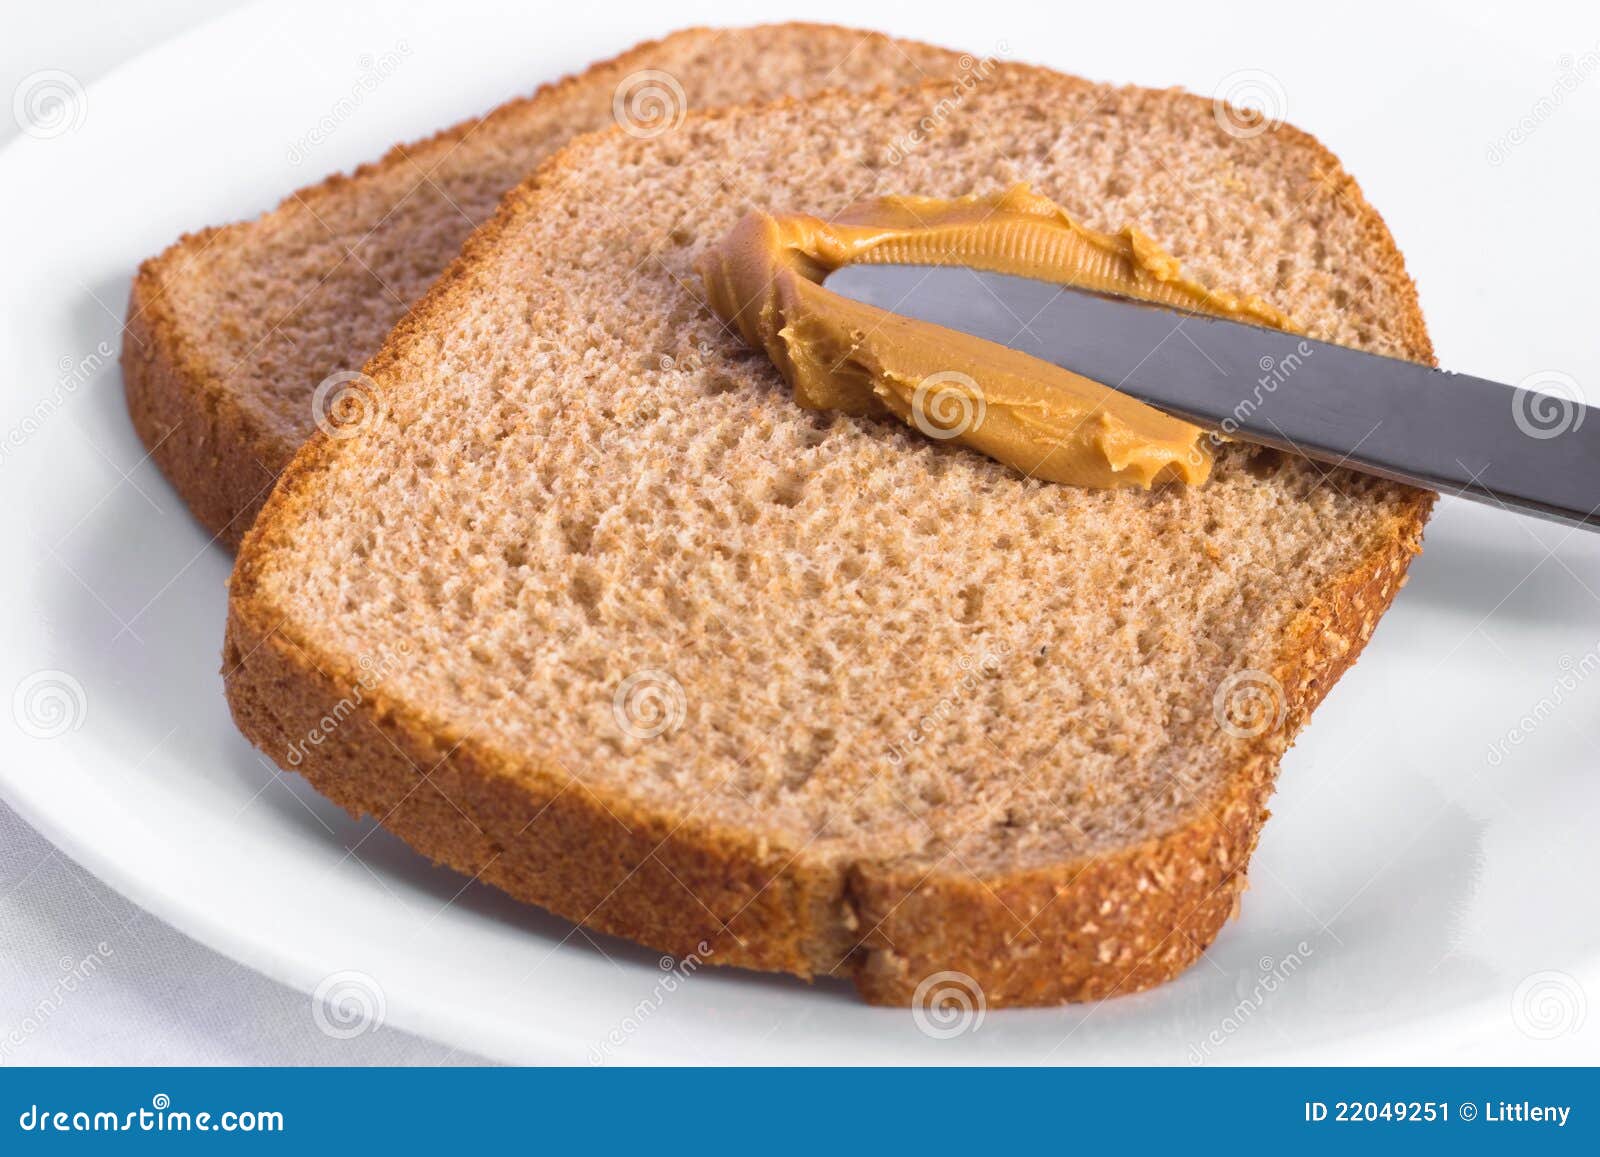 10 515 Peanut Butter Bread Photos Free Royalty Free Stock Photos From Dreamstime